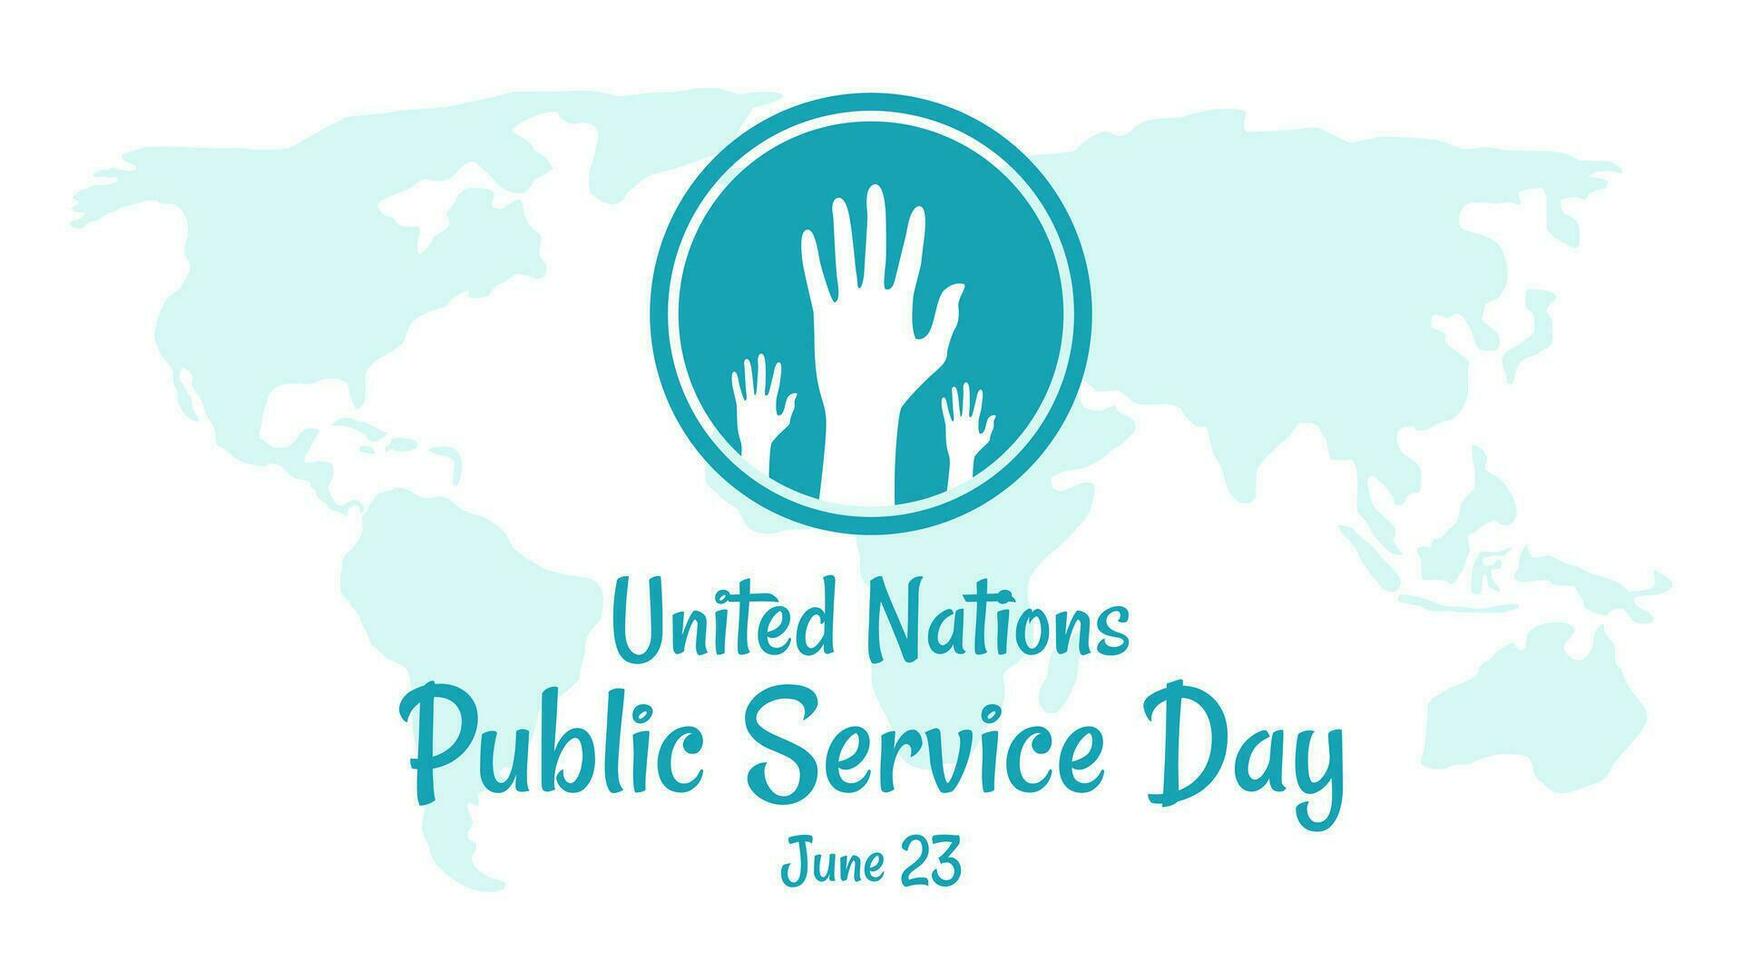 United Nations Public Service Day with hand icon and world map background in flat design vector